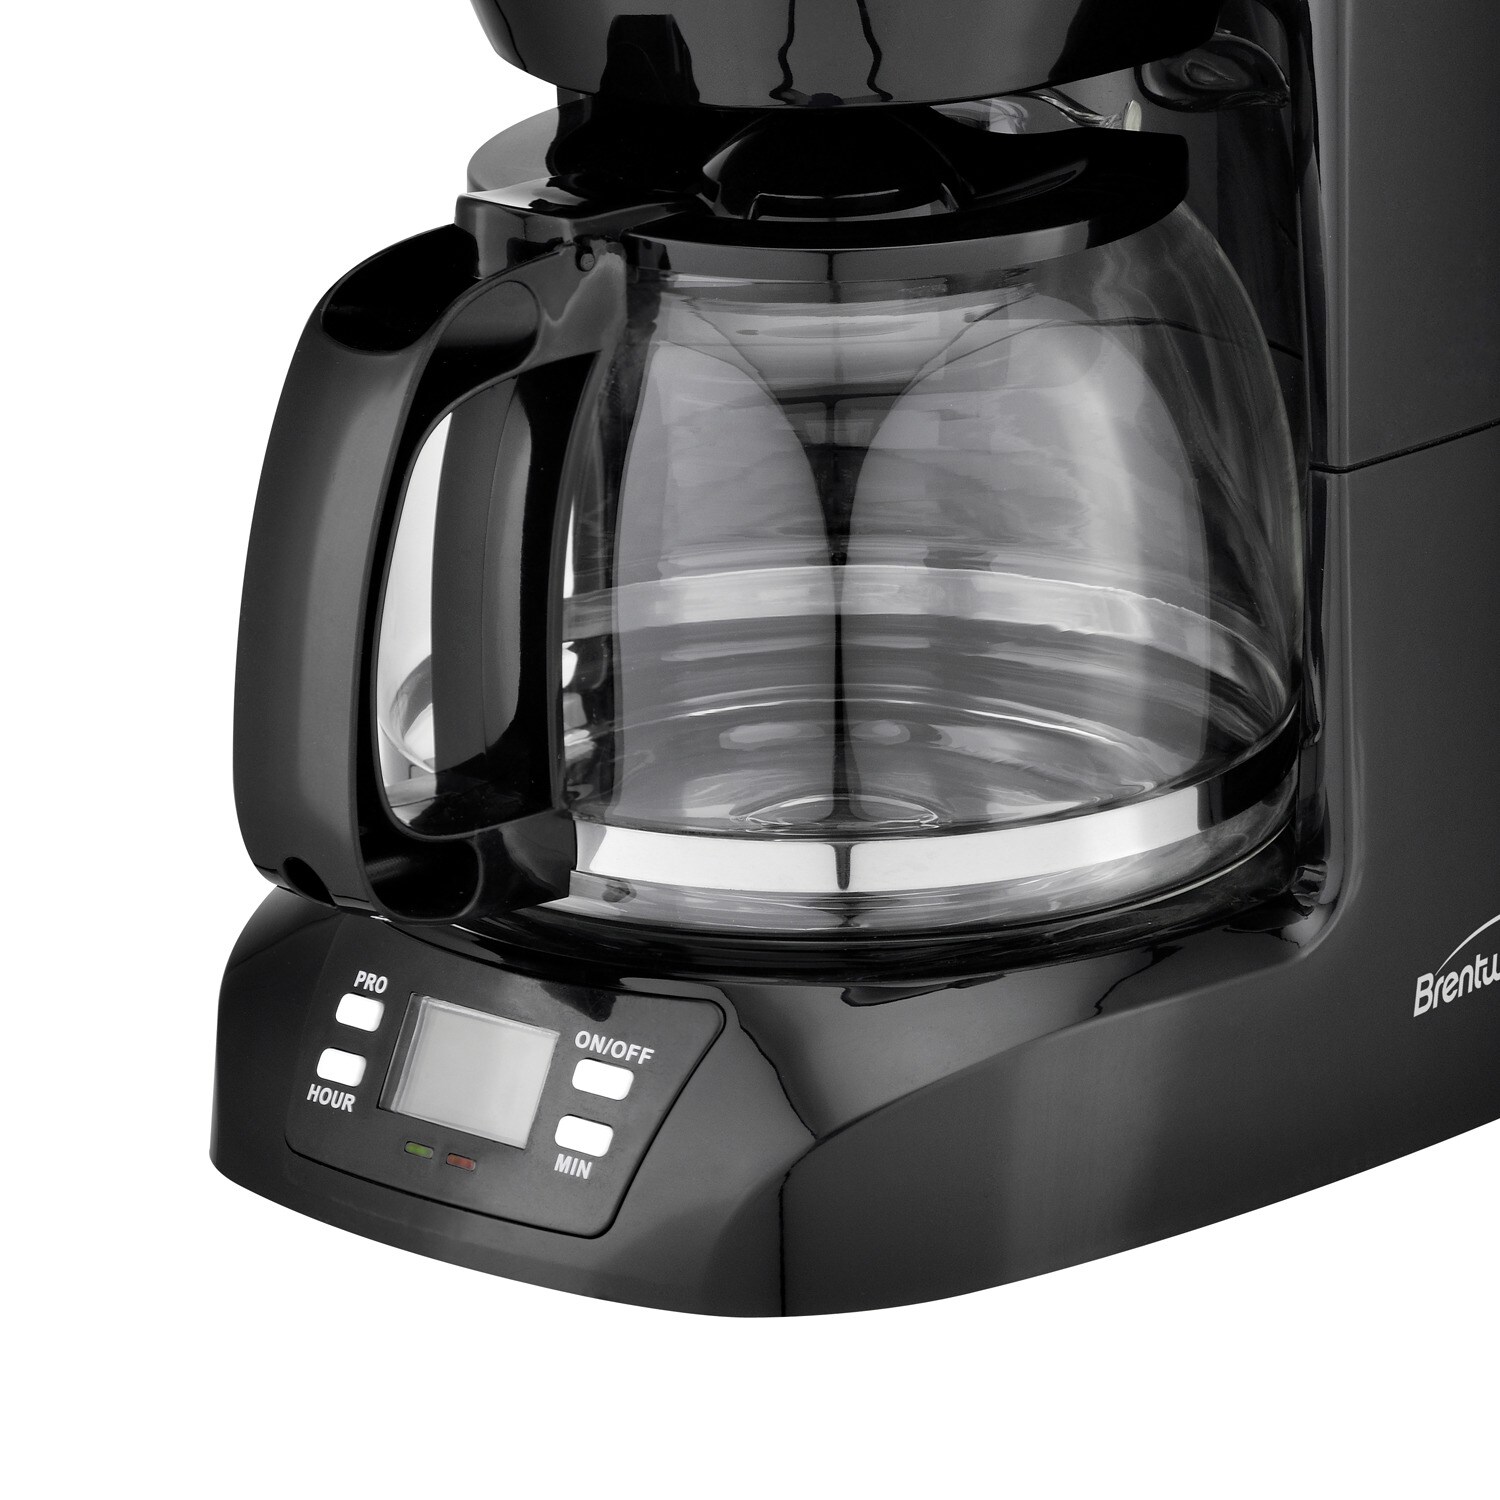 New BLACK+DECKER BXCM1201IN 12-Cup Drip Coffee Maker Water Level Indicator  Black